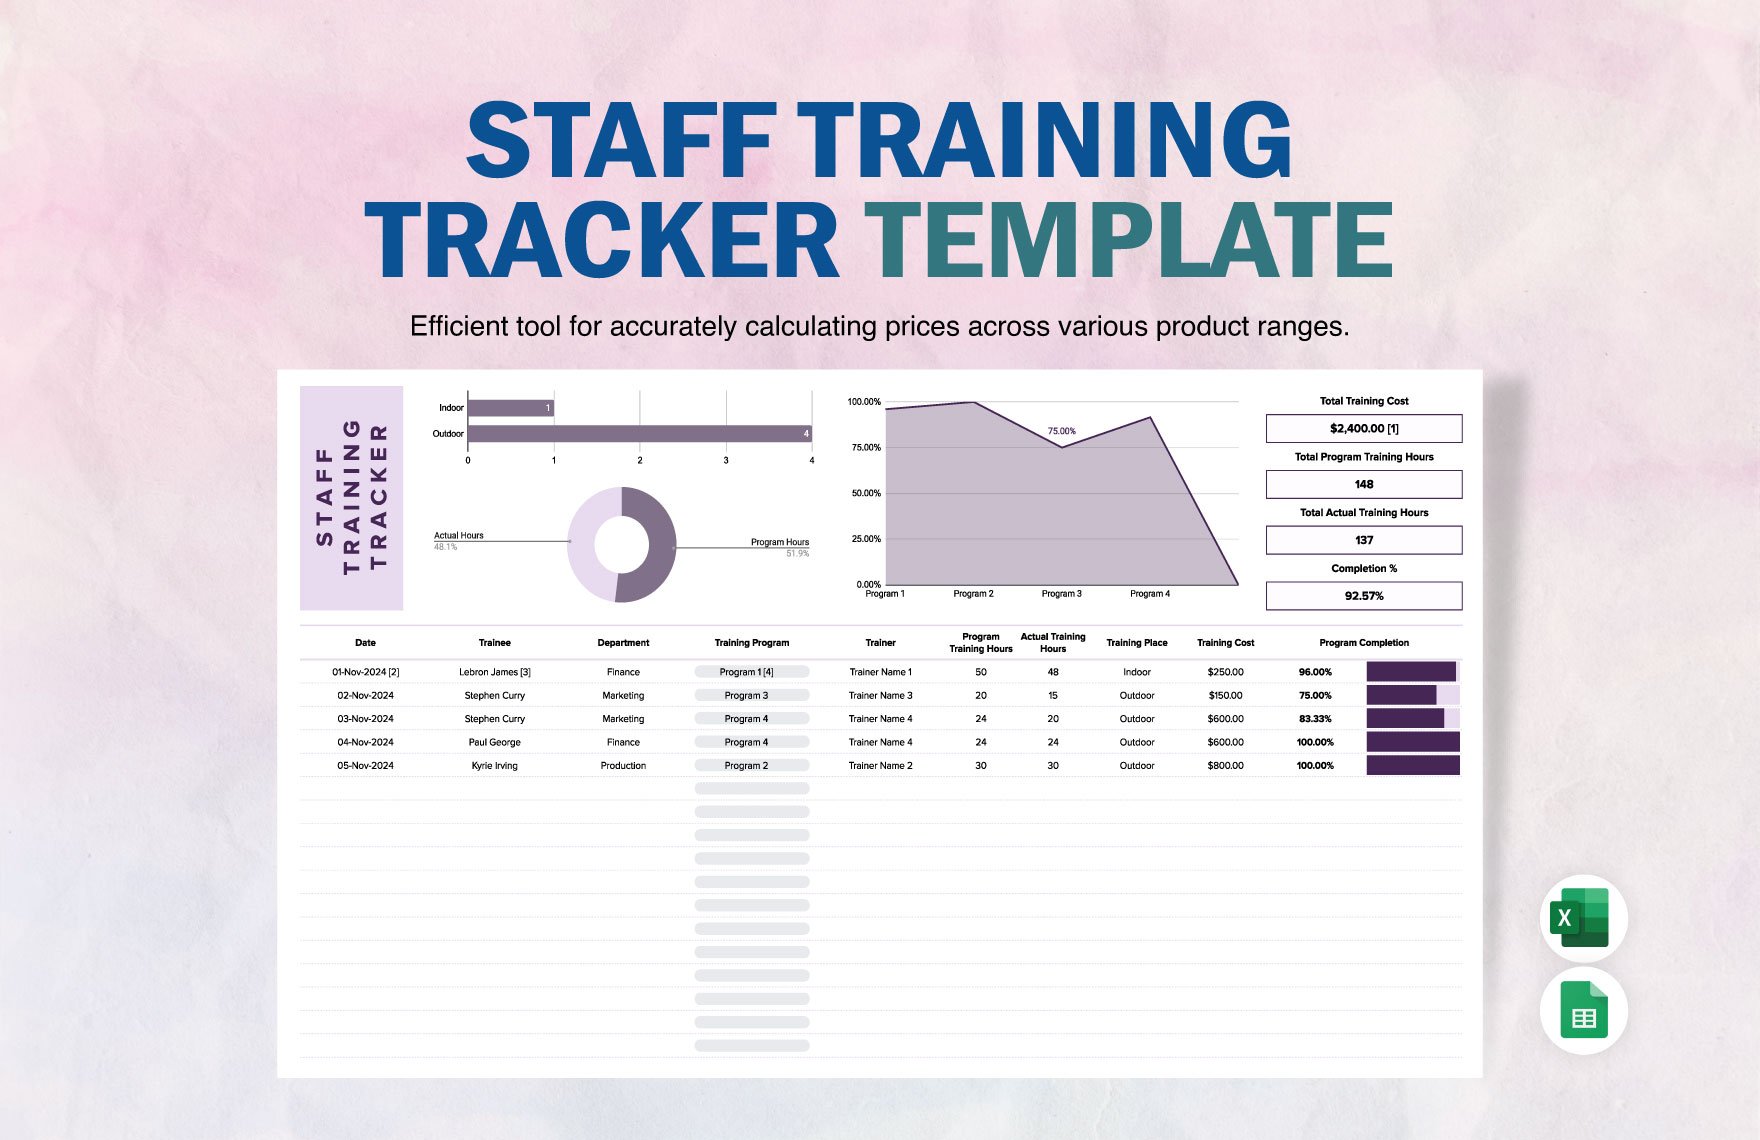 Staff Training Tracker Template in Excel, Google Sheets